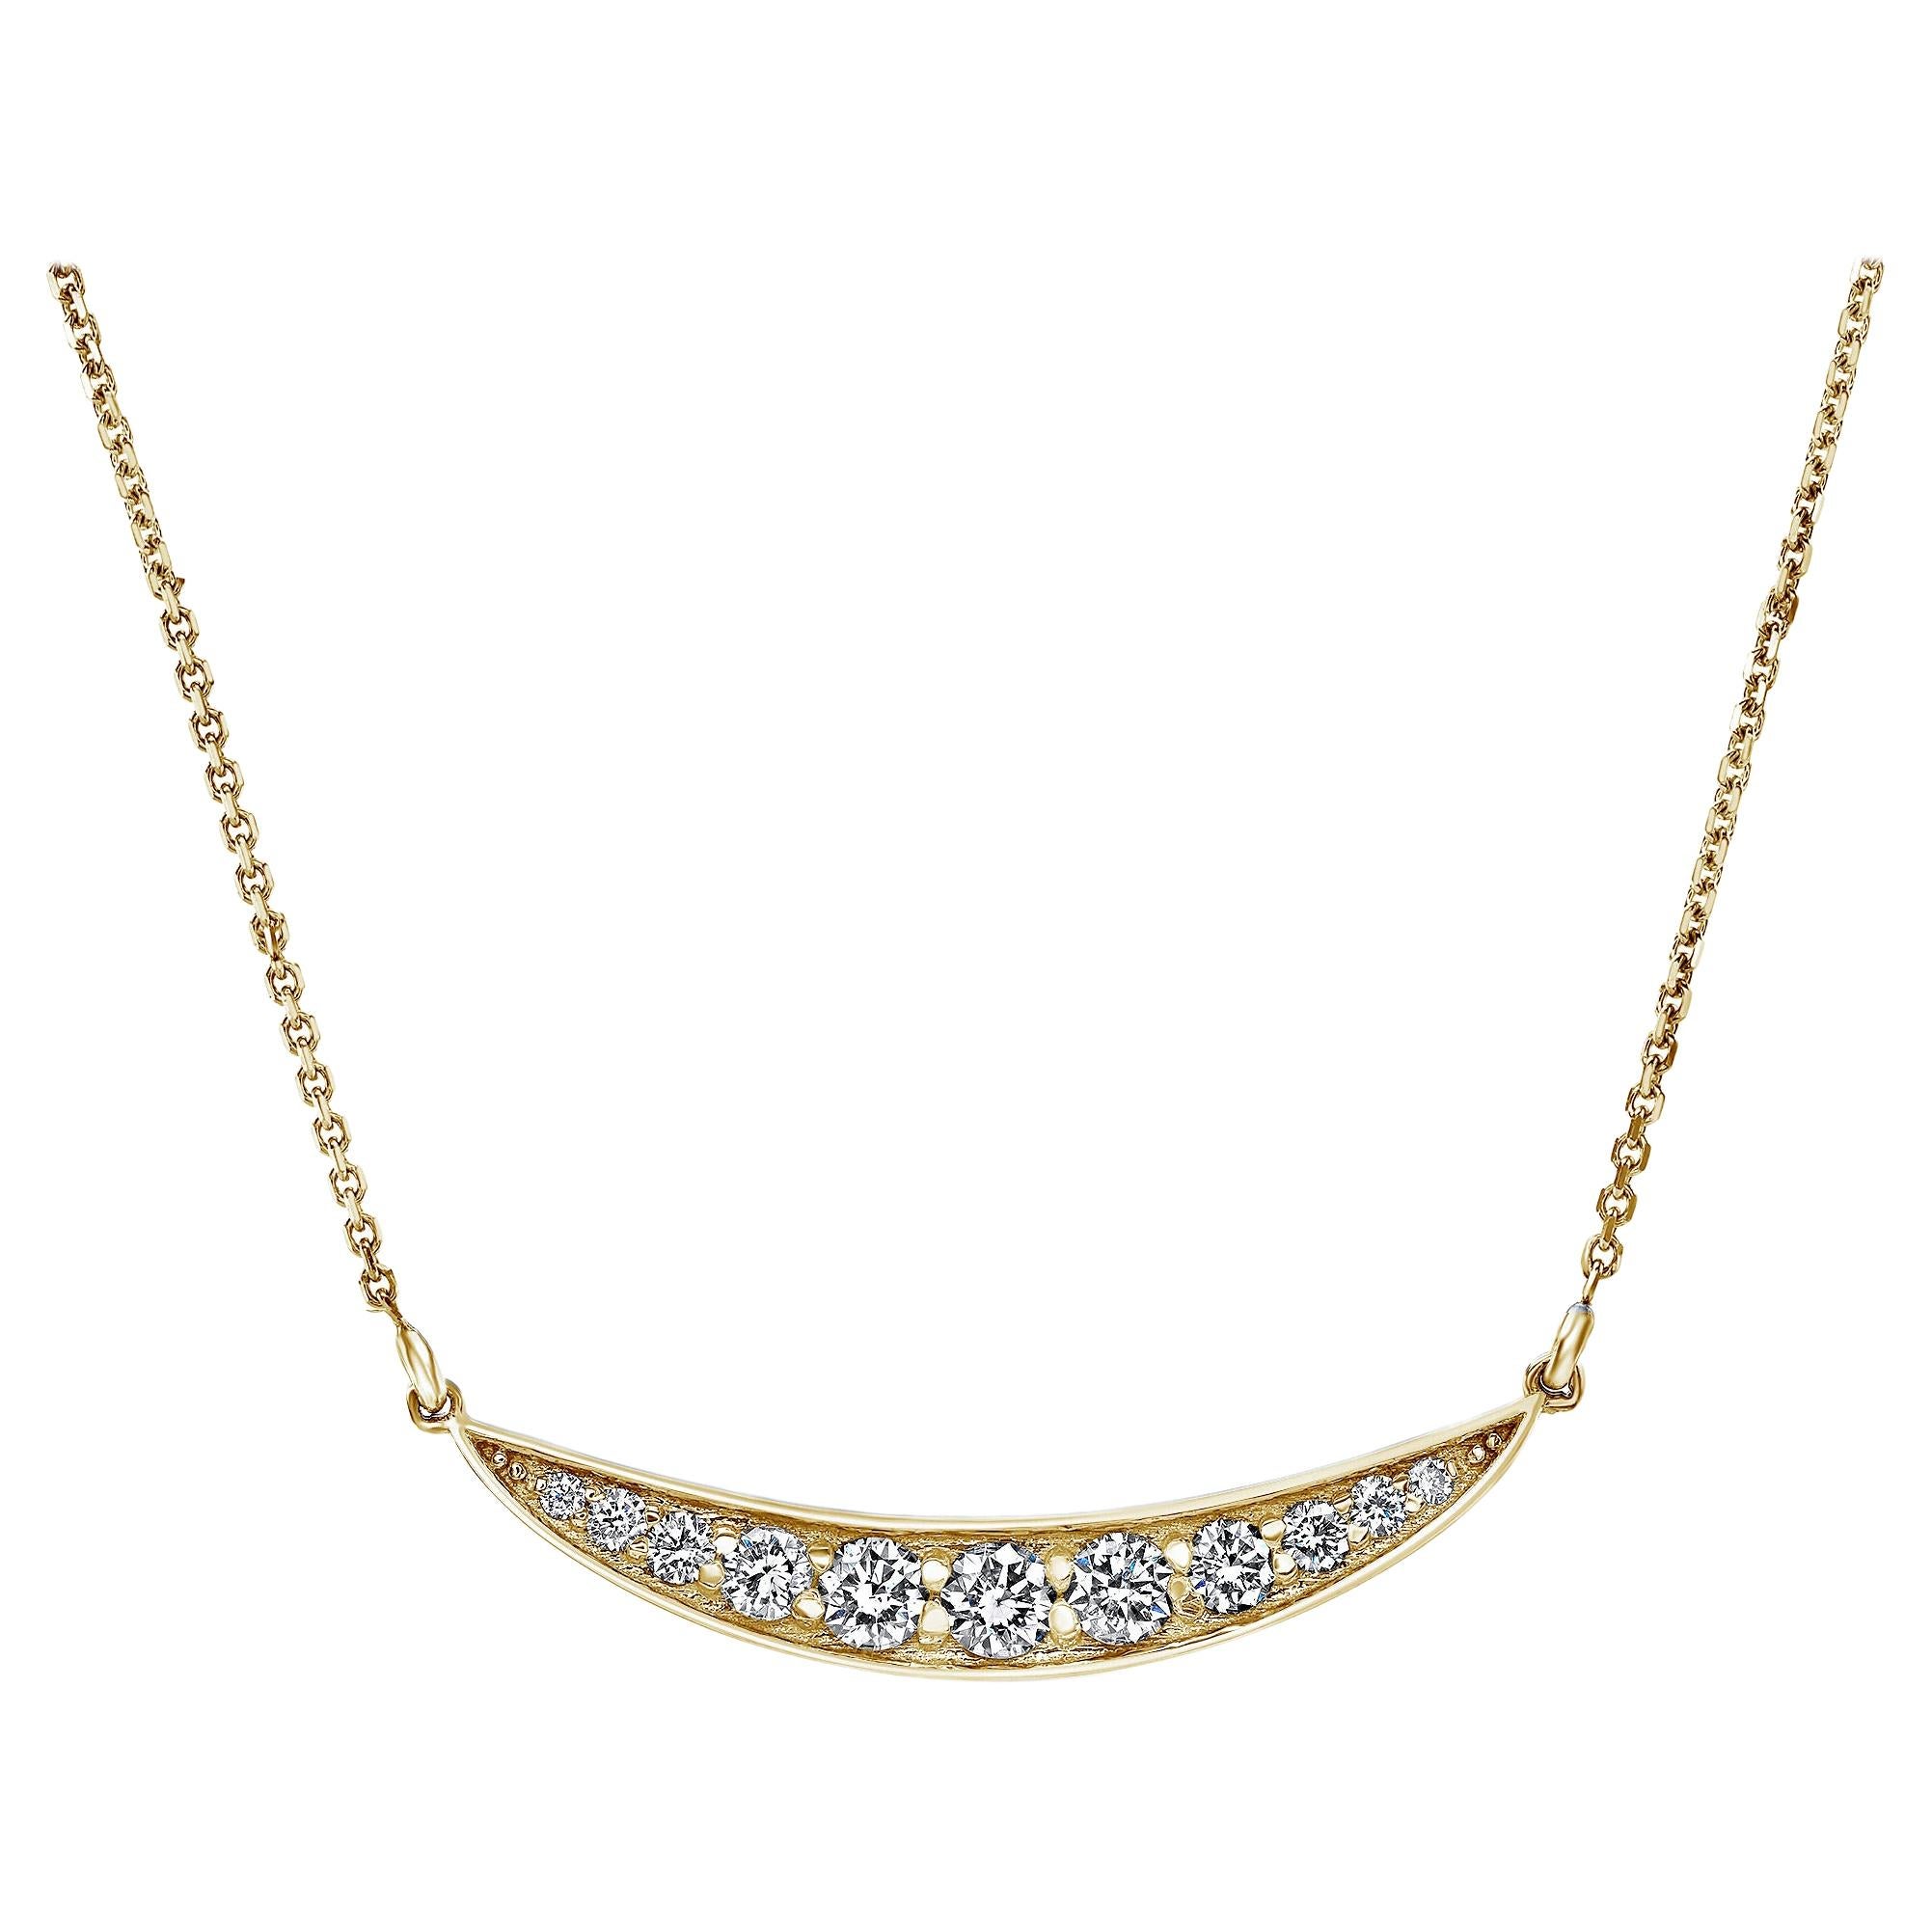 0.55 Carat Diamond Curved Pendant Necklace in 14k Yellow Gold, Shlomit Rogel For Sale